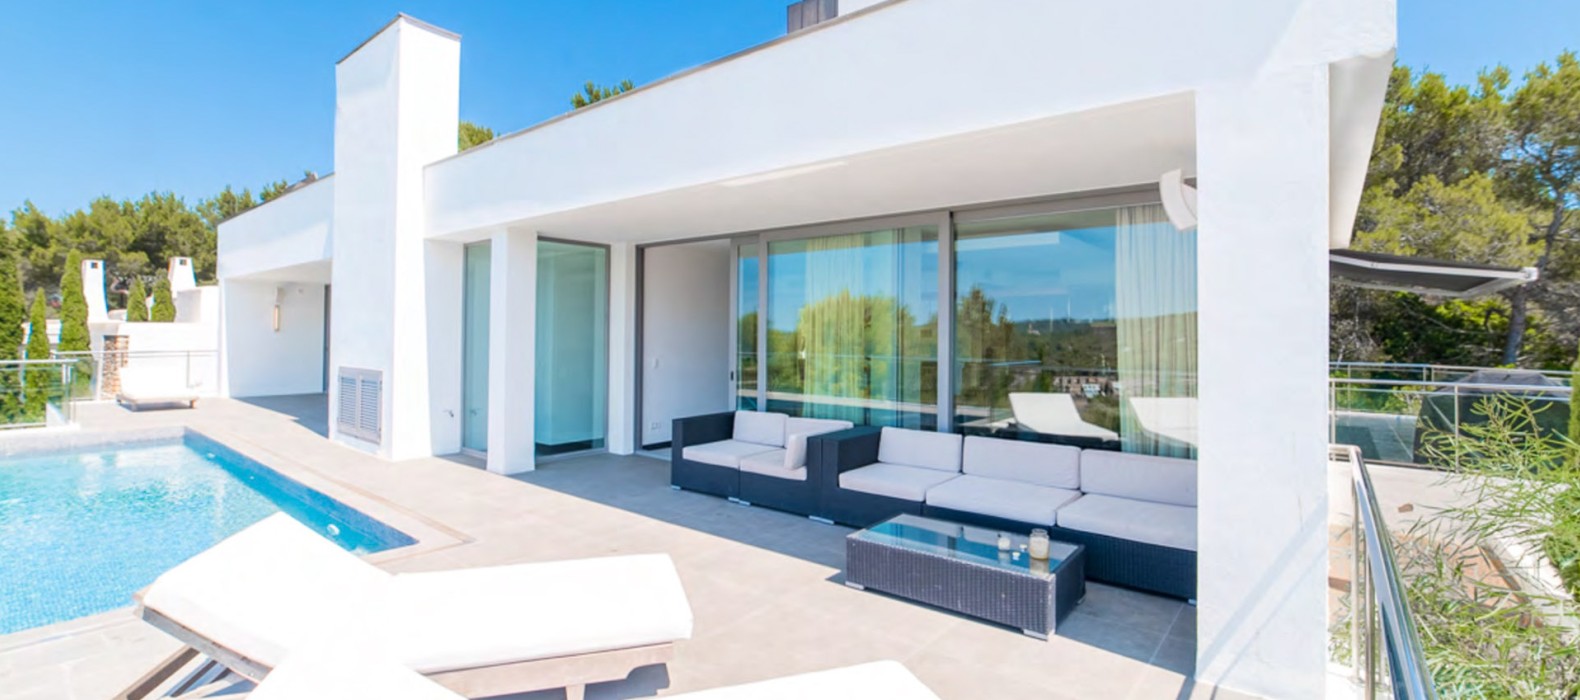 Exterior area with siting and pool of Villa Miragon in Ibiza